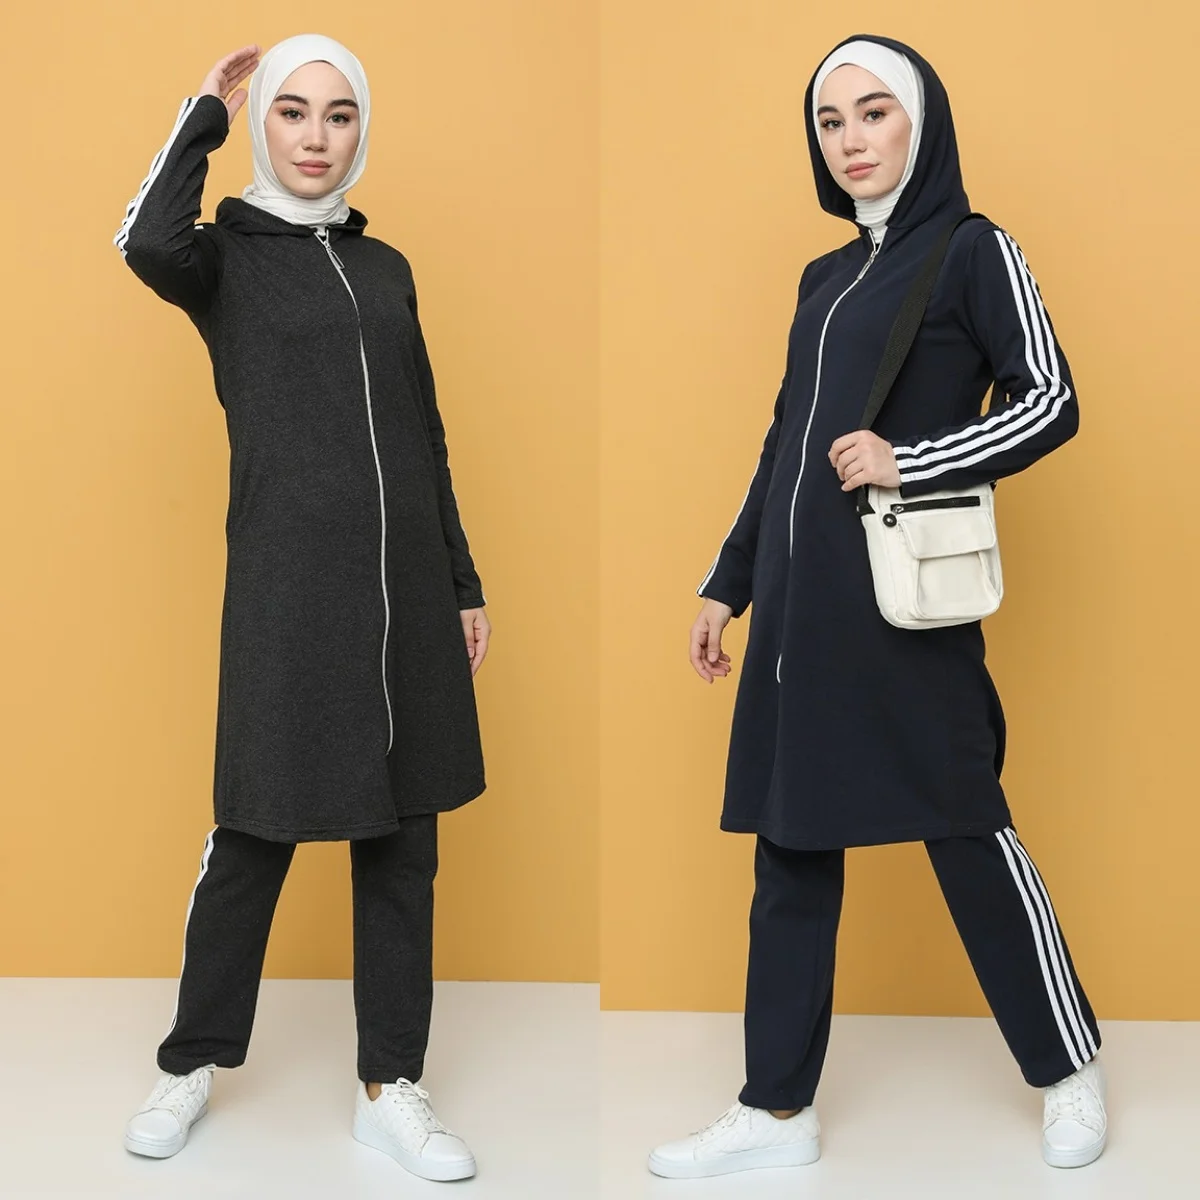 Hooded Tracksuit Solid Zippered Casual Unlined Long Sleeve 4 Seasons Sports Women Muslim Fashion Hijab Clothing  Isalmic  Arabic